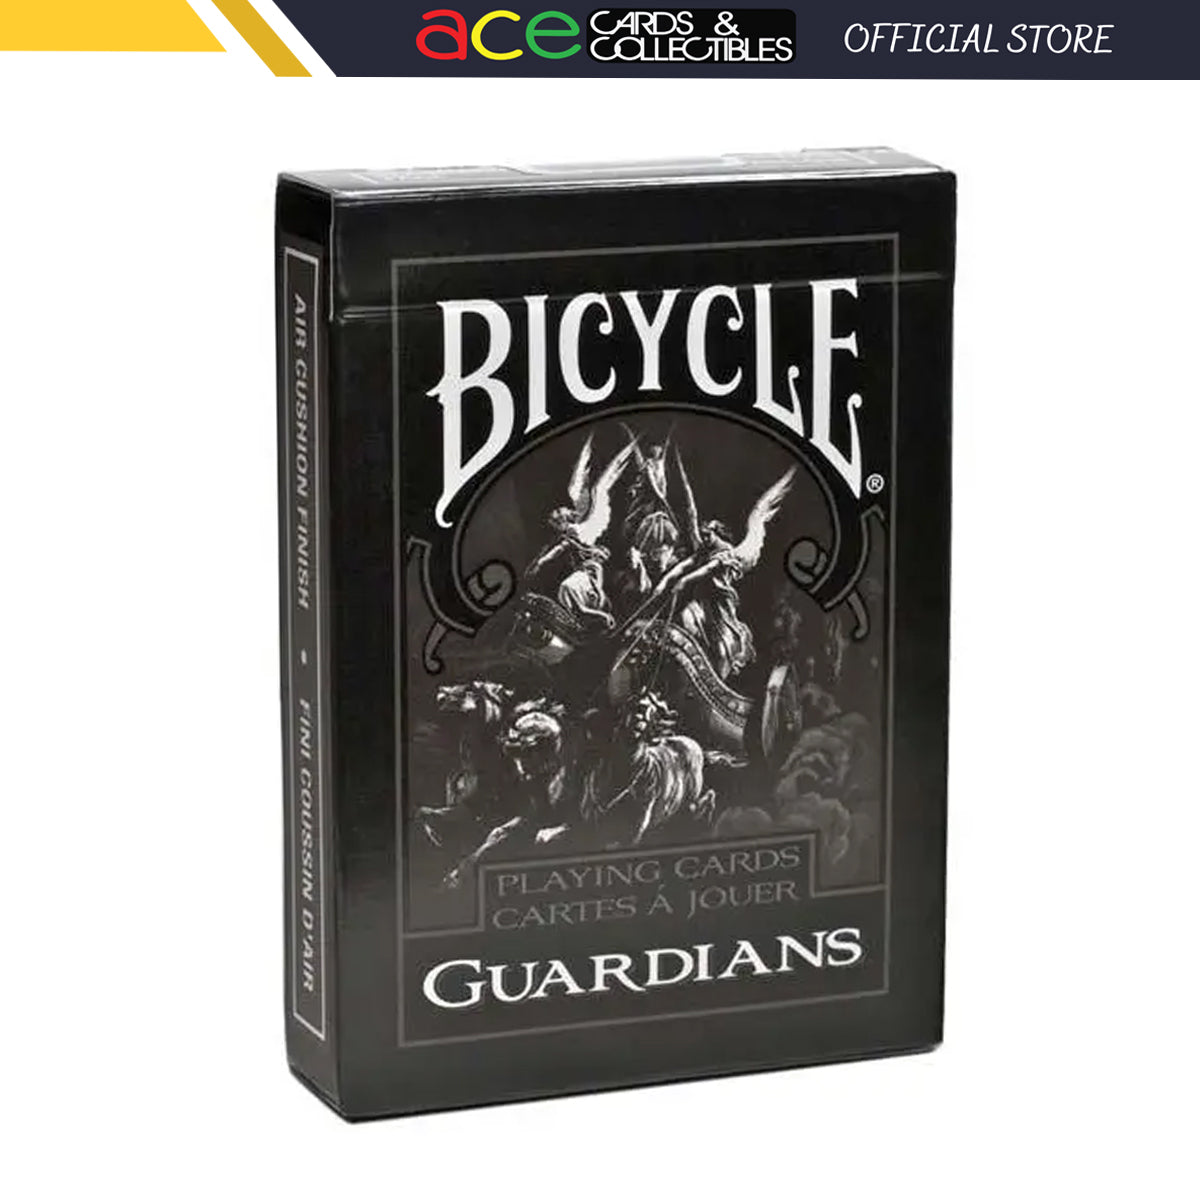 Bicycle Guardians Playing Cards-United States Playing Cards Company-Ace Cards &amp; Collectibles